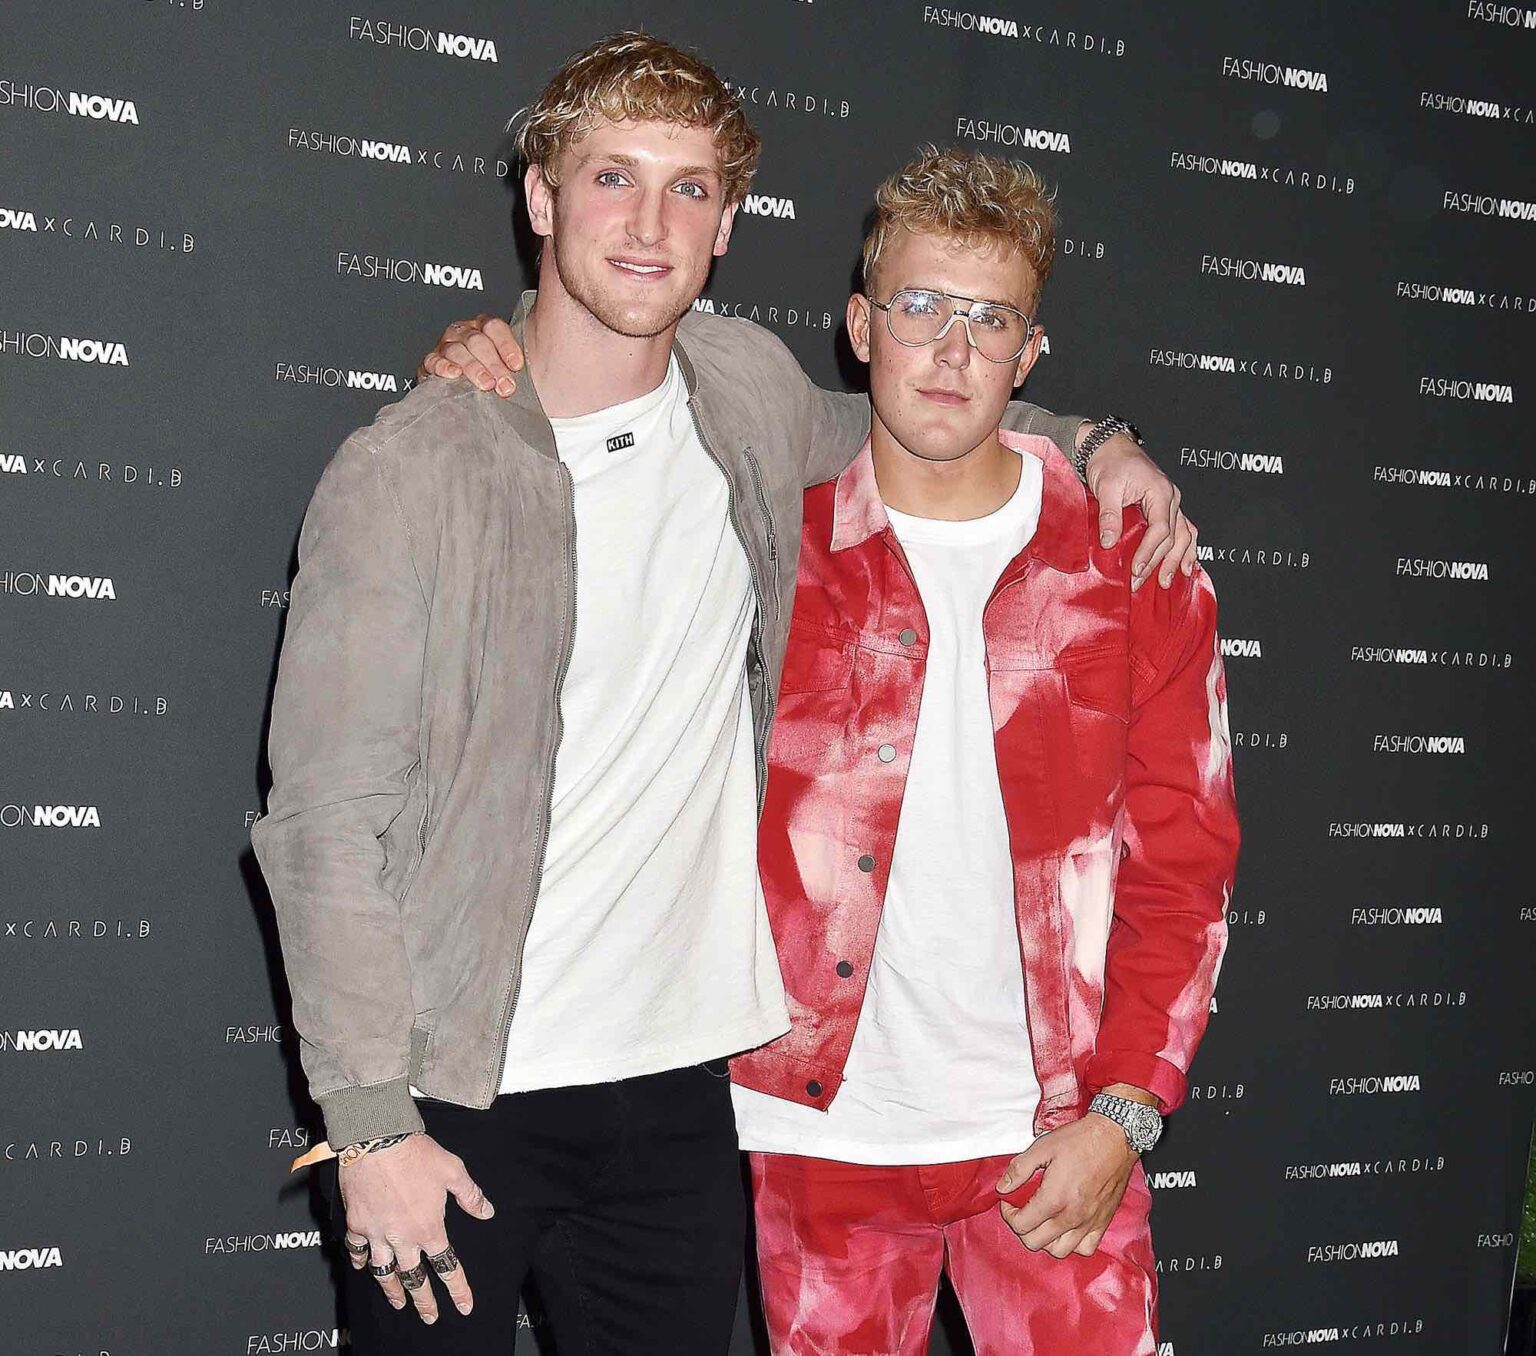 Logan Paul calls out Jake Paul's behavior and how it could ruin his potential UFC career. Head into the ring to learn more about this Paul family drama.